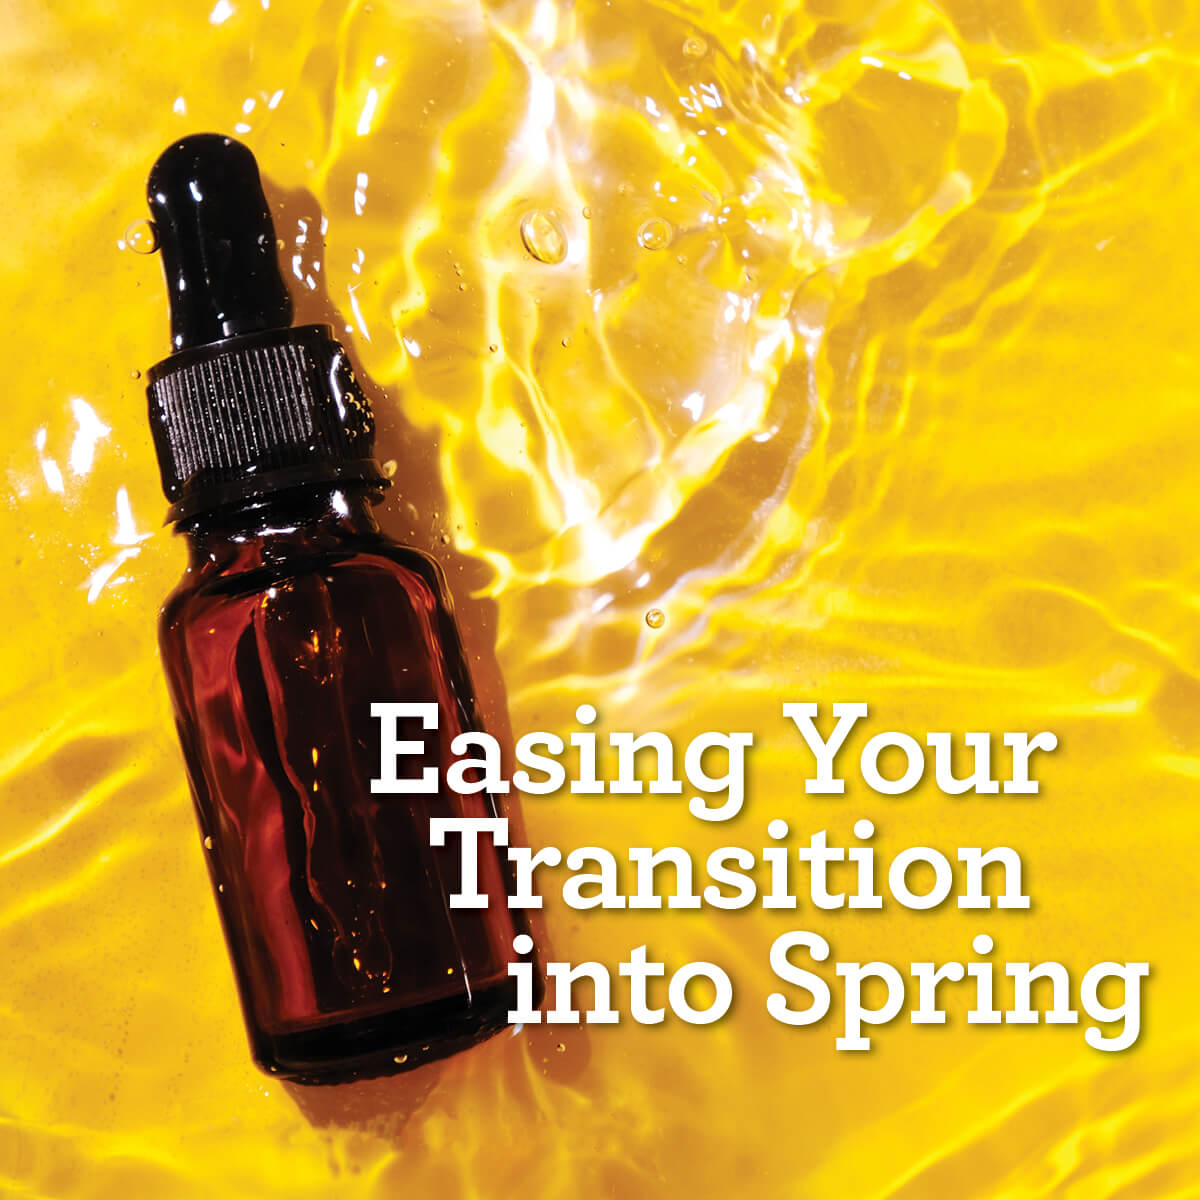 Easing Your Transition into Spring